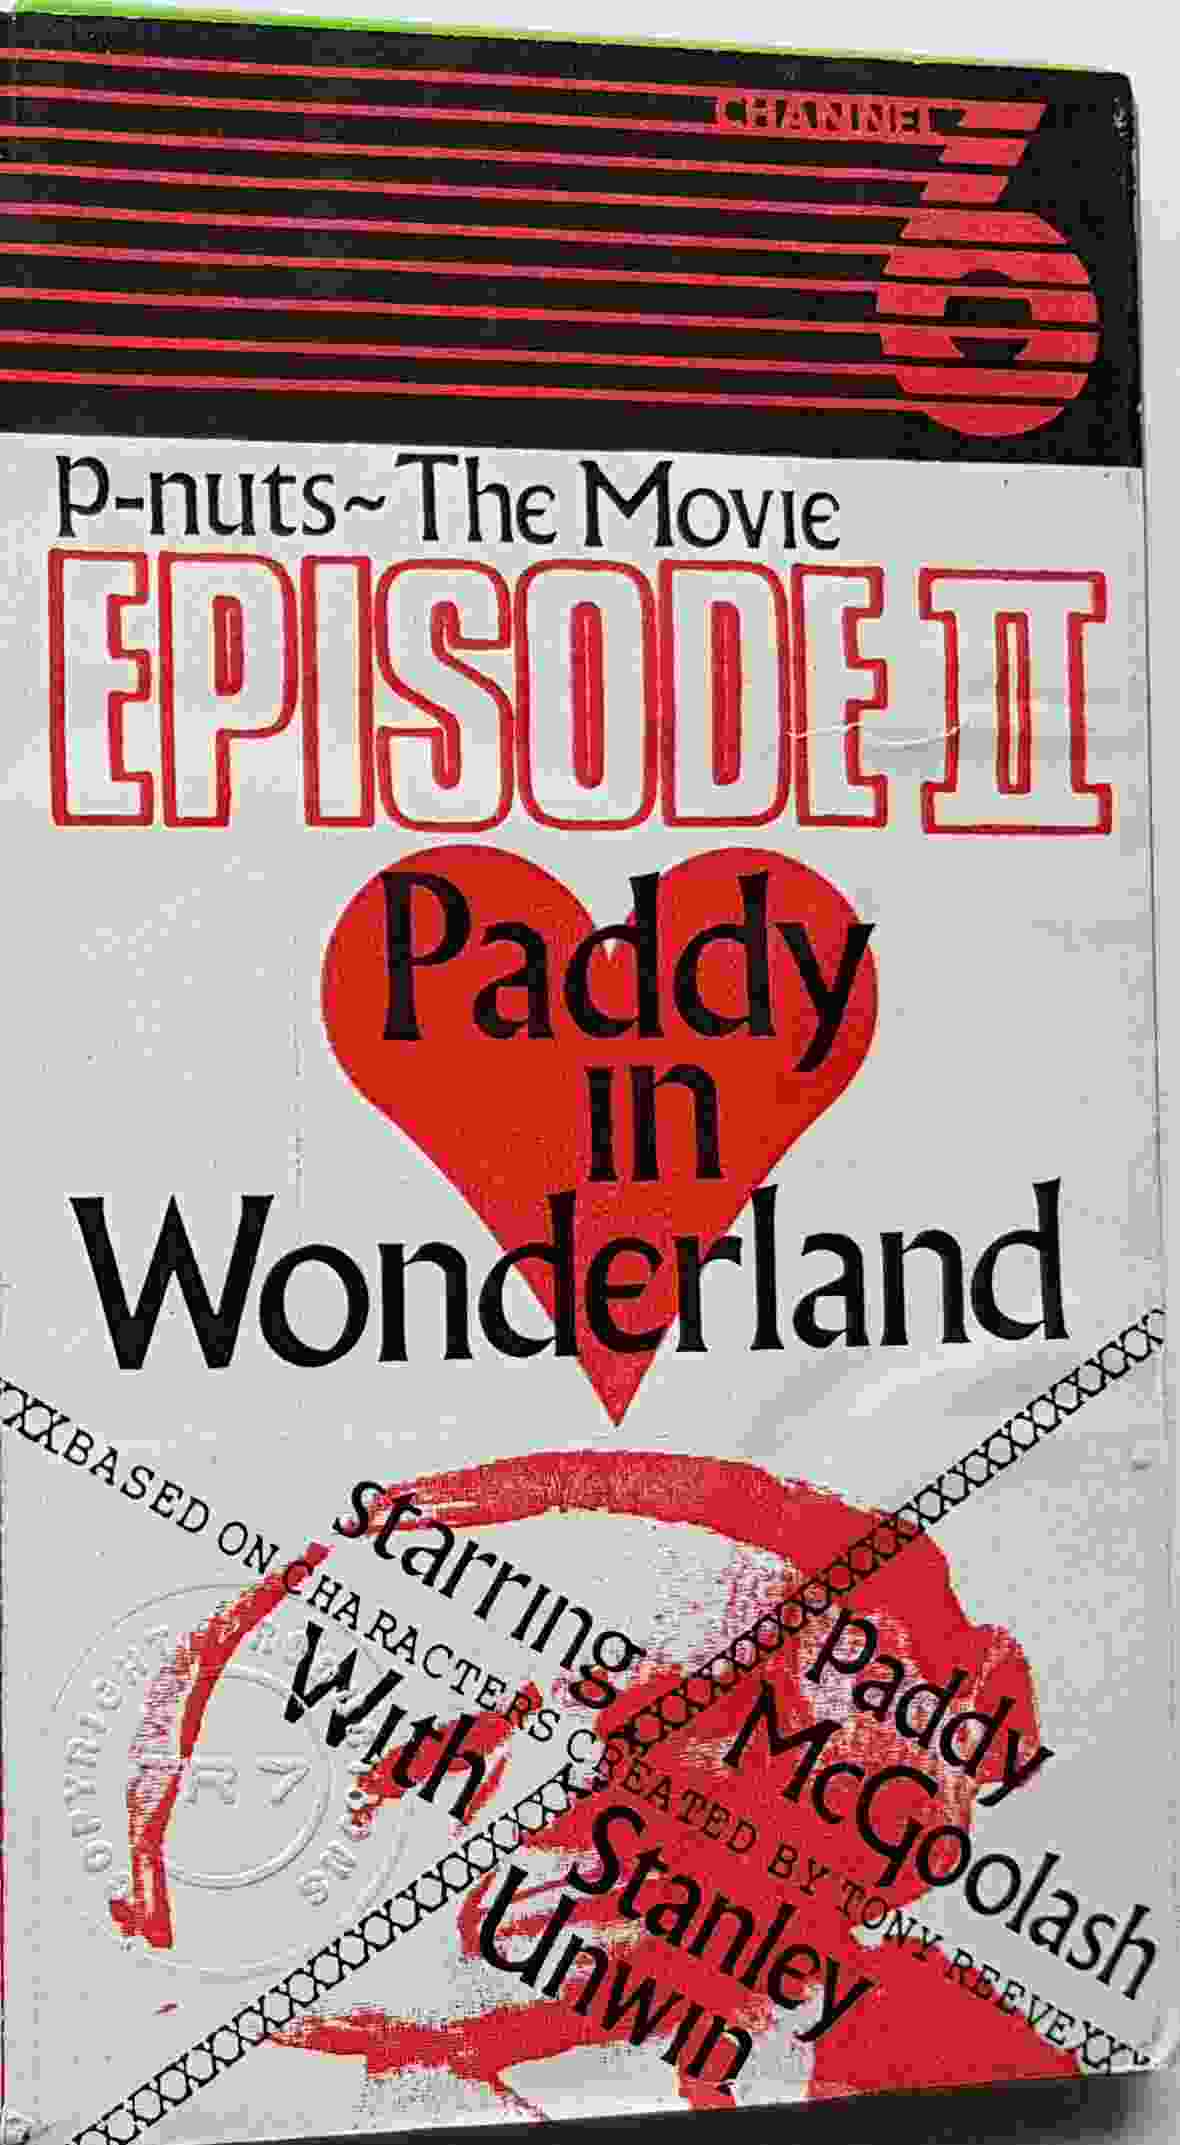 Picture of videos-PM-PIW Paddy McGoolash - Paddy in Wonderland by artist Unknown from ITV, Channel 4 and Channel 5 library